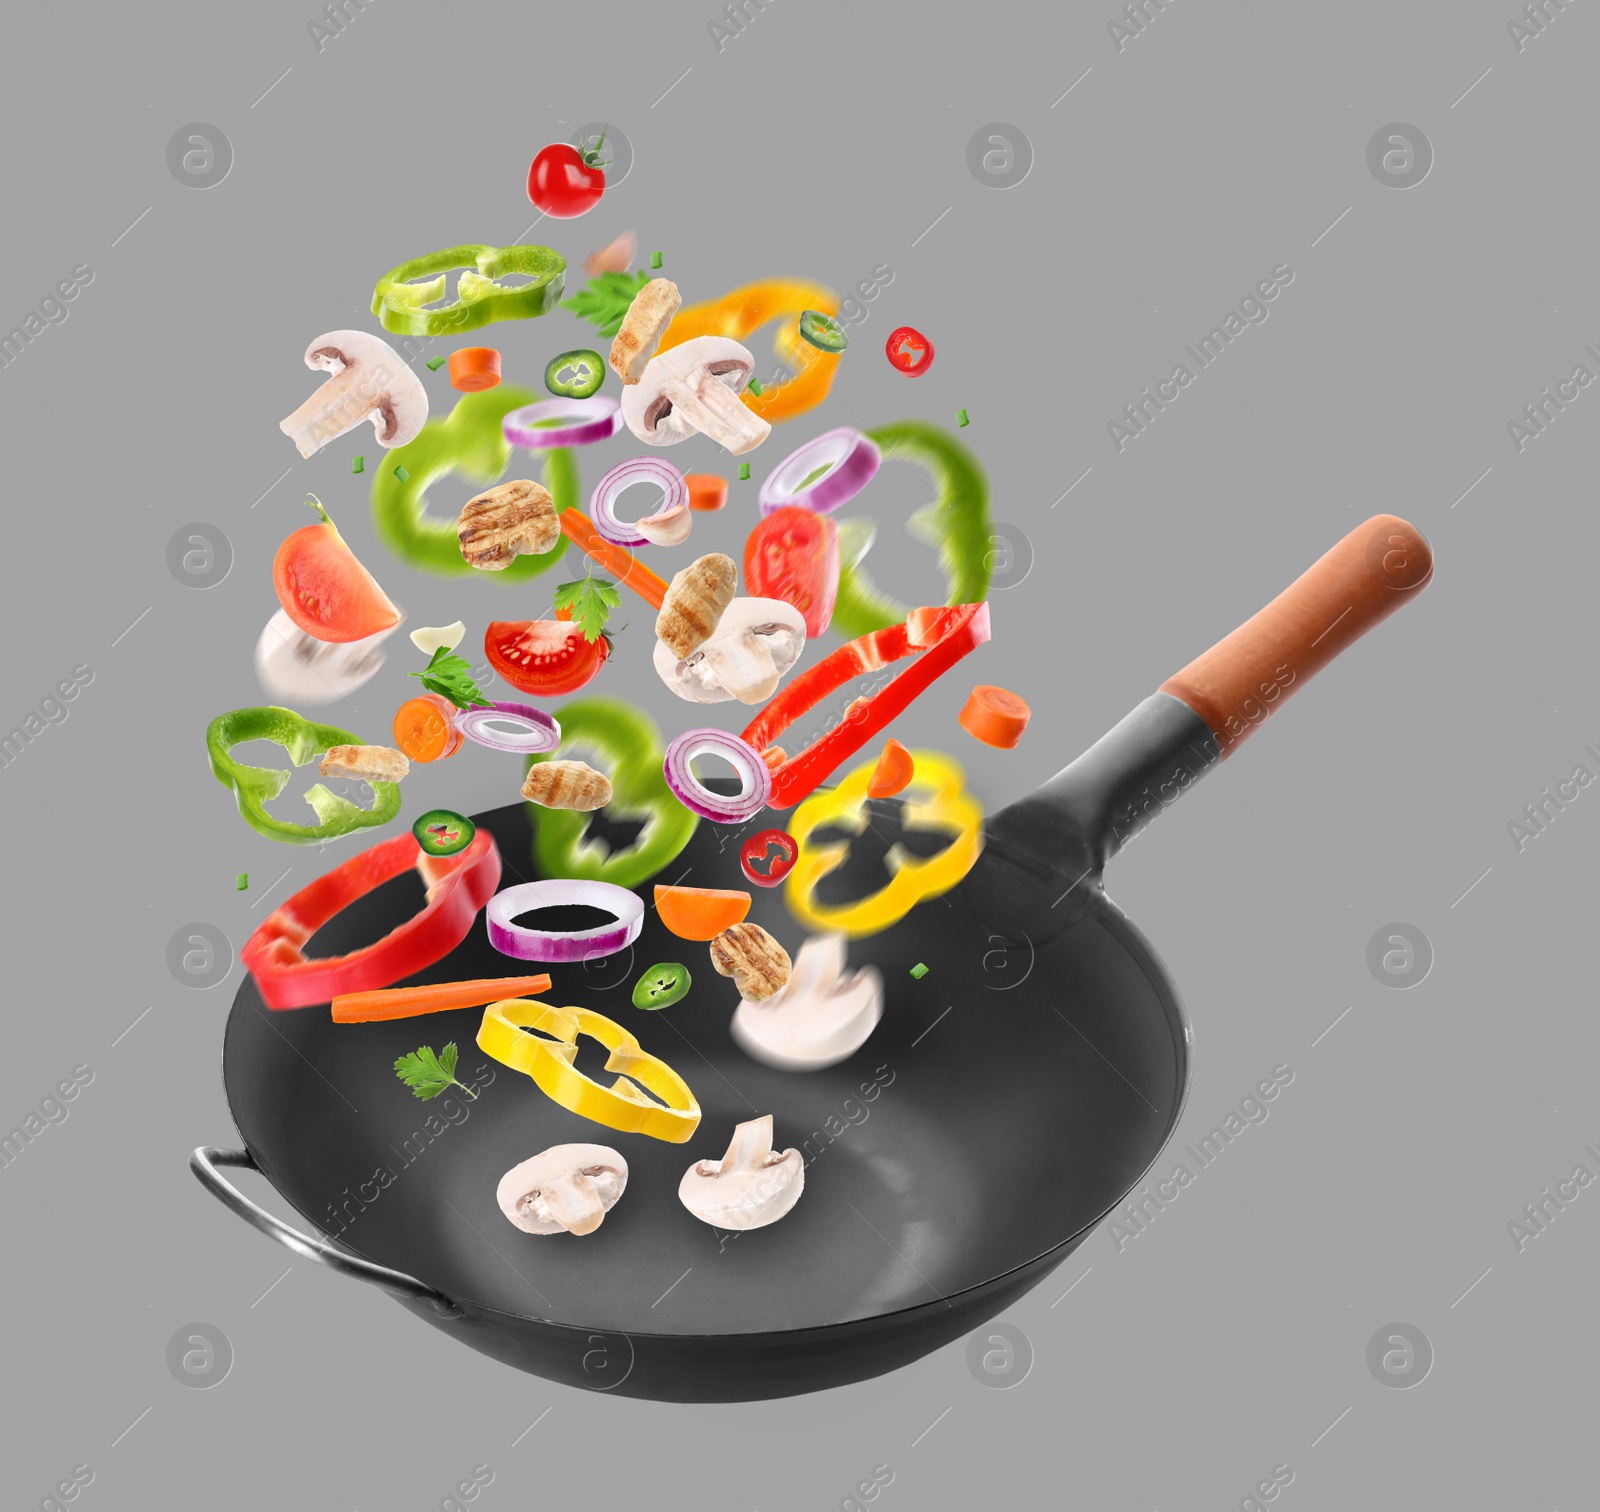 Image of Different tasty ingredients falling into wok on light grey background